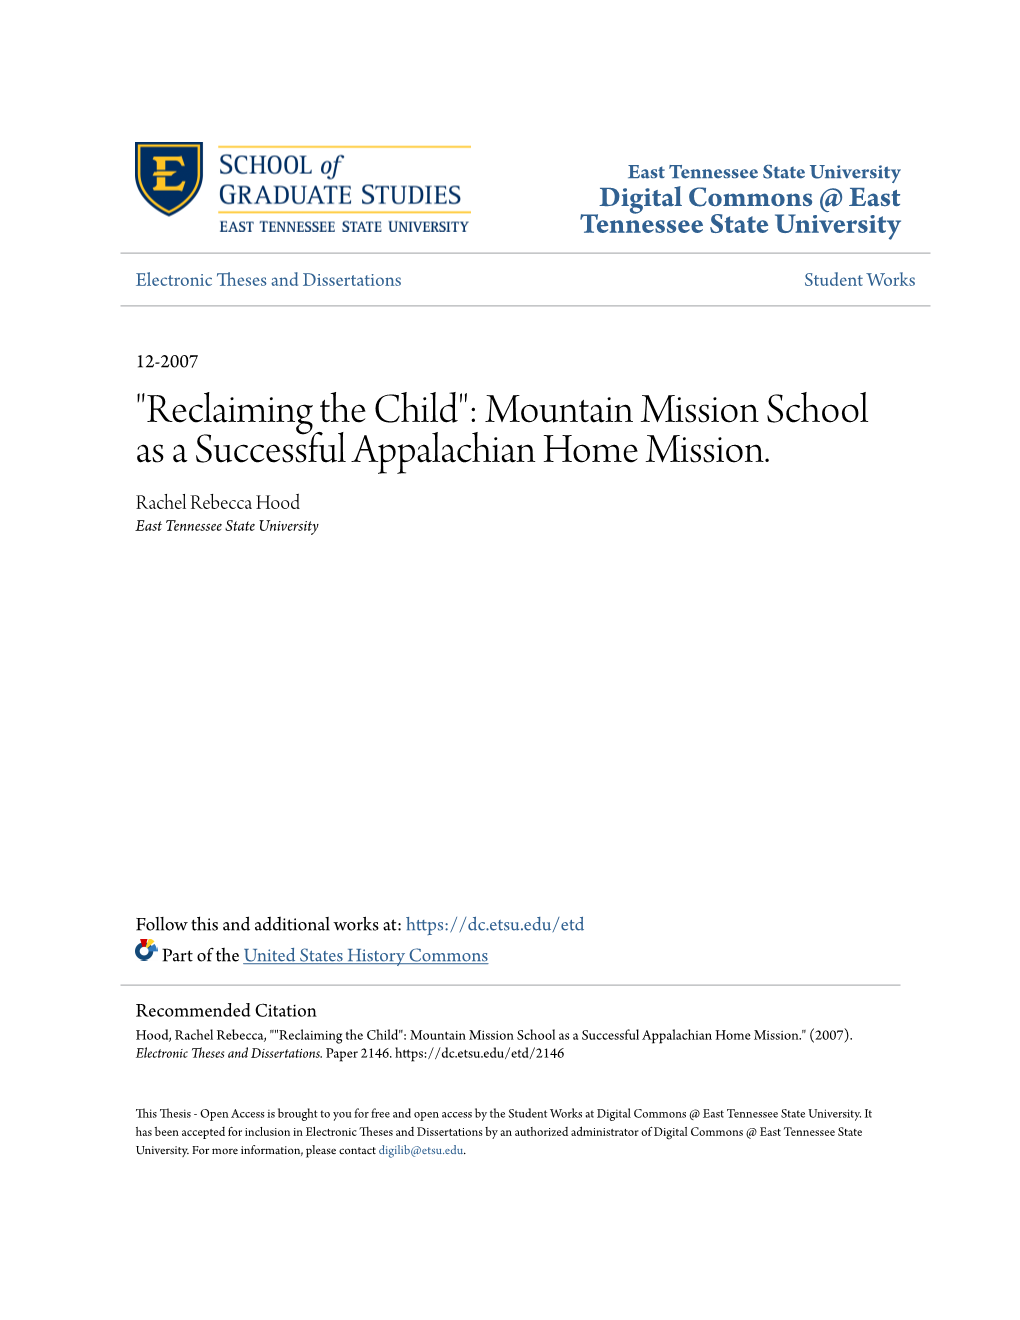 "Reclaiming the Child": Mountain Mission School As a Successful Appalachian Home Mission